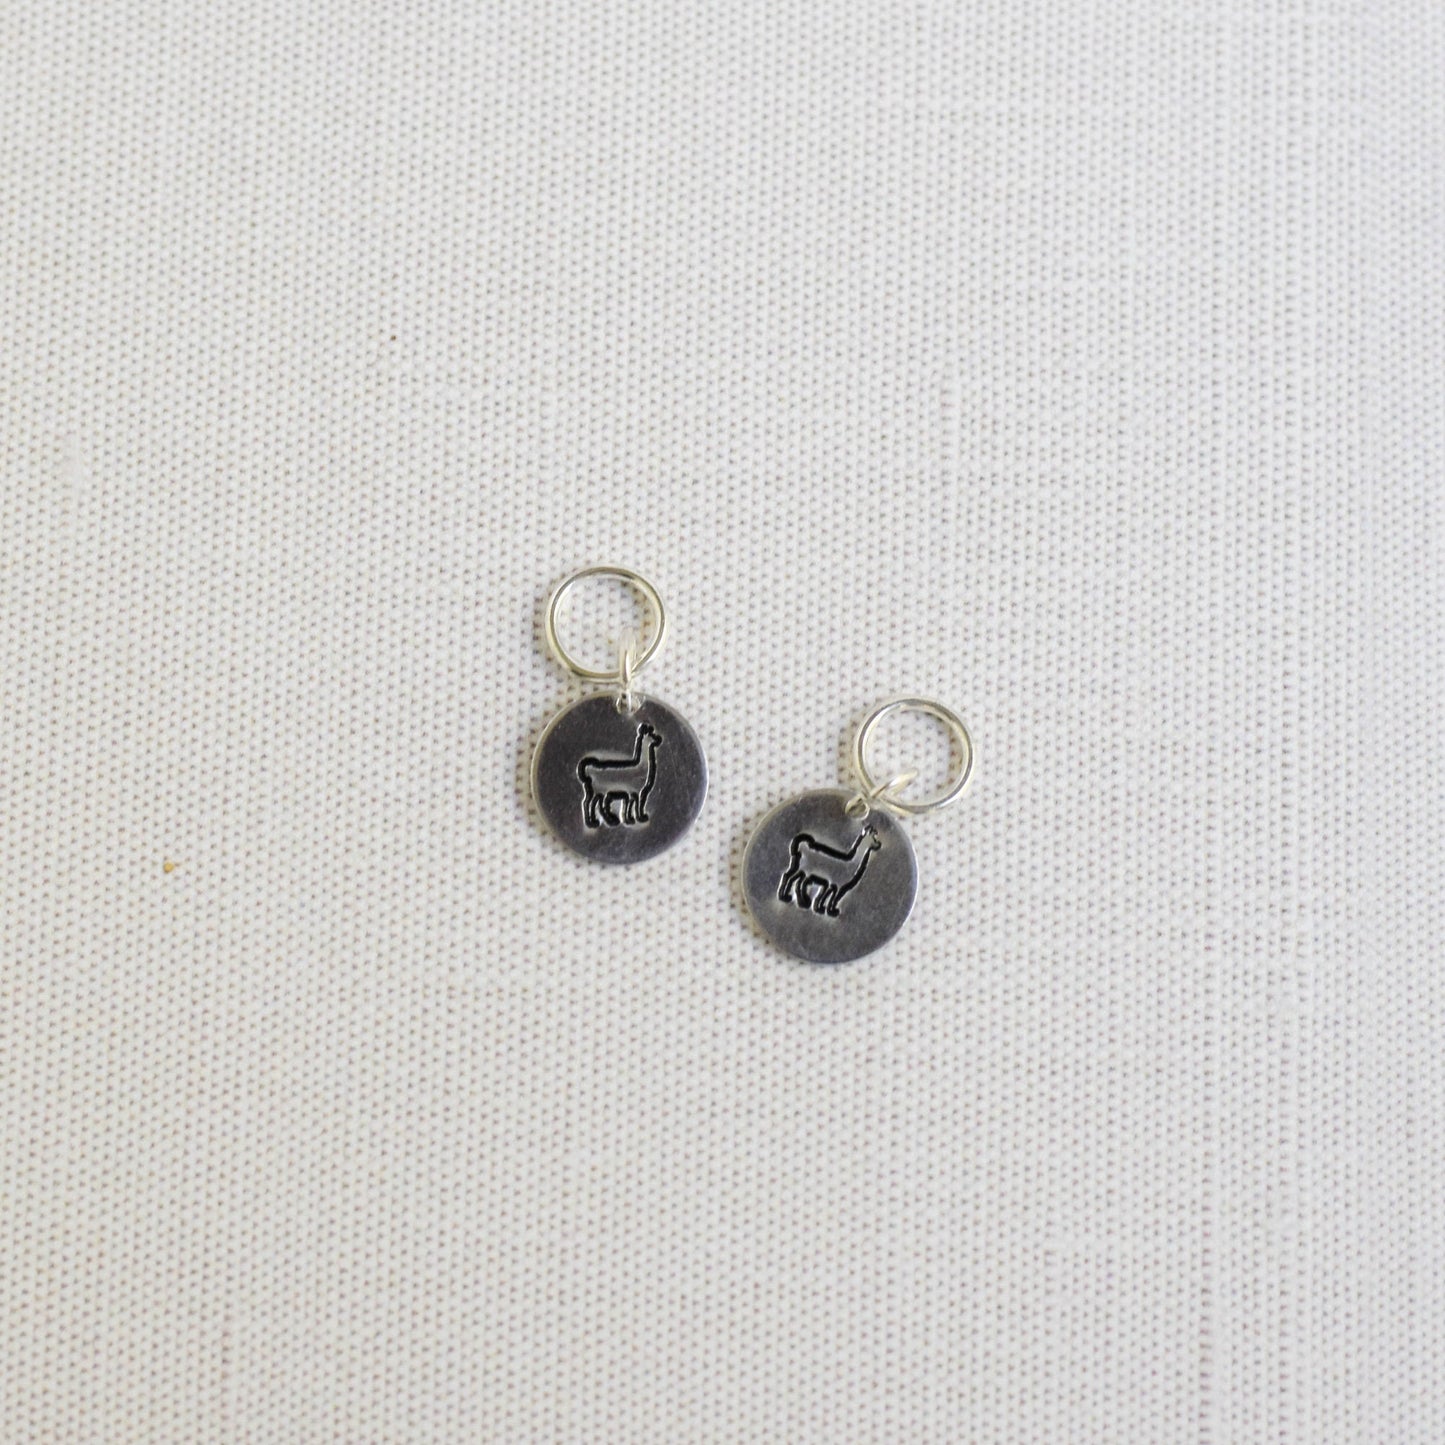 Set of 2 Hand Stamped Stitch Markers - Llama